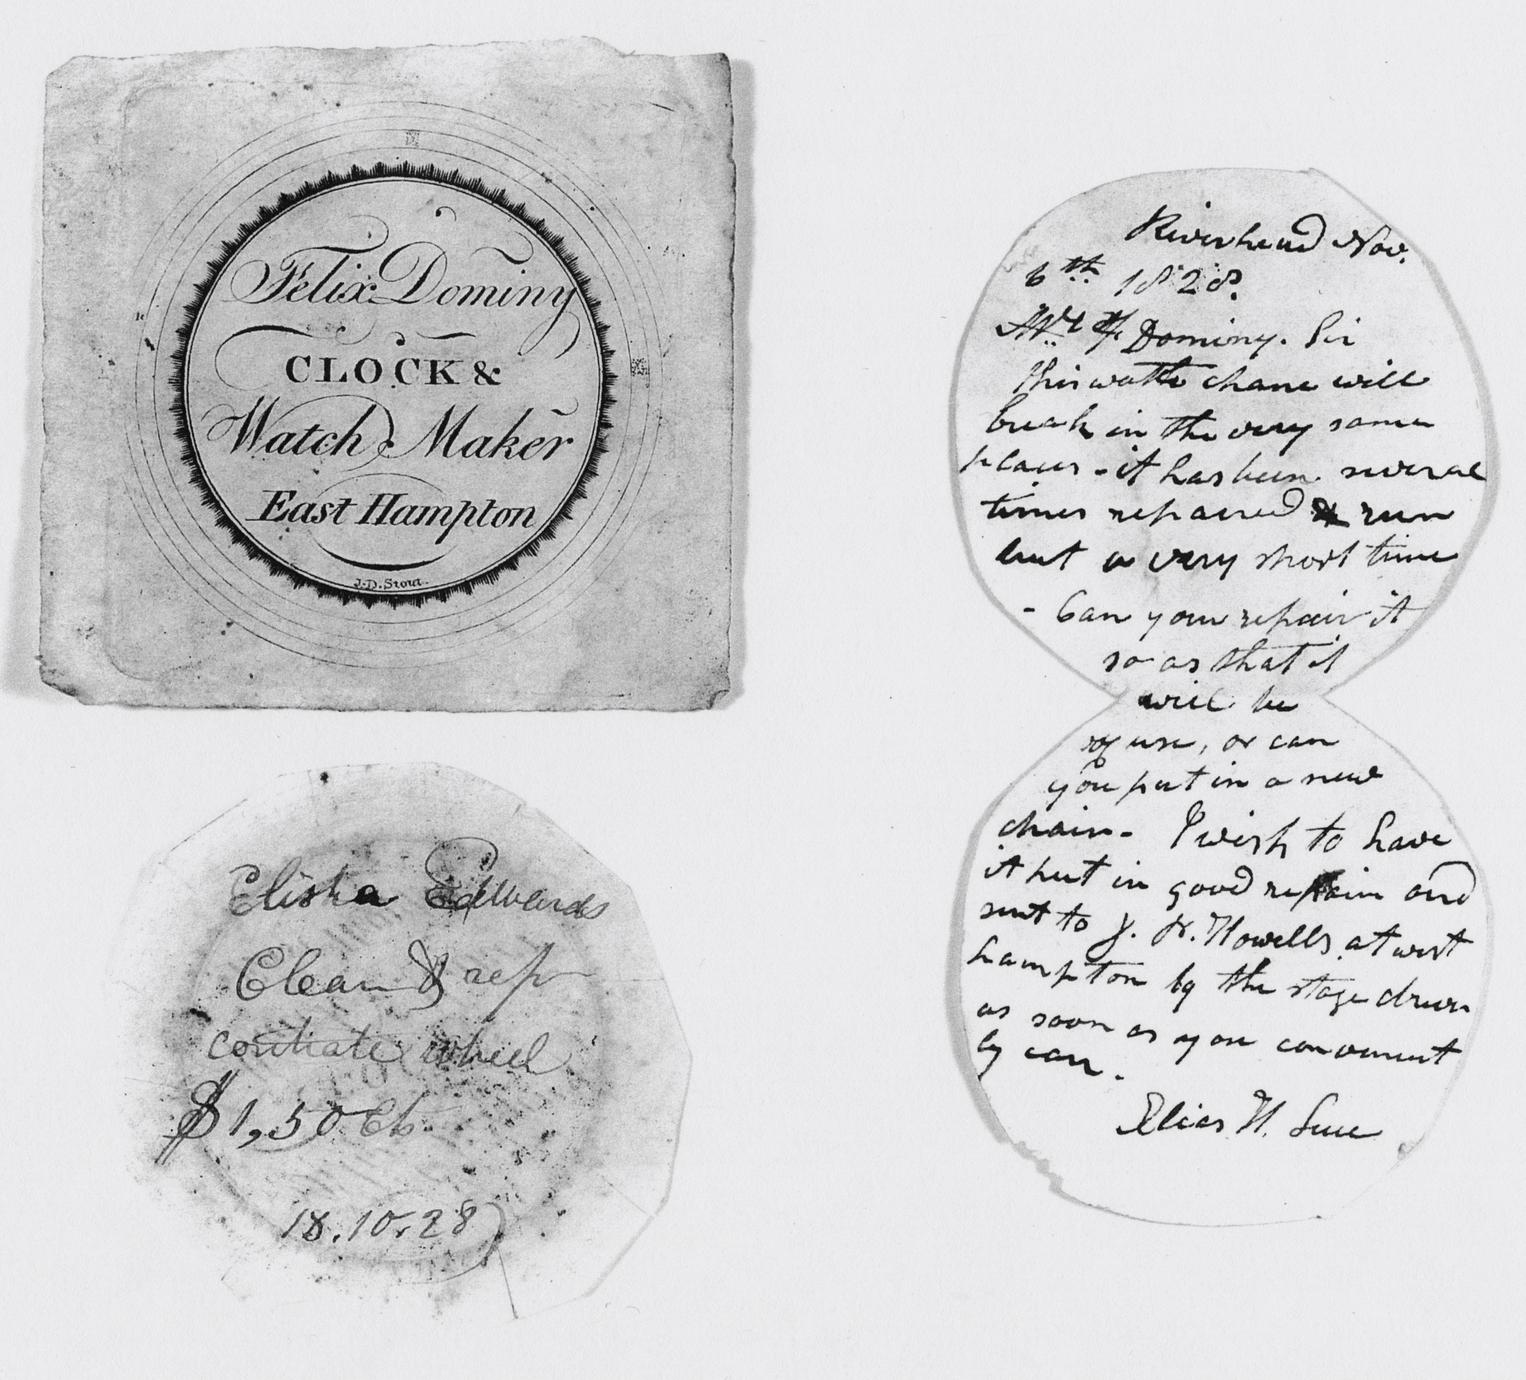 Black and white photograph of watch papers of Felix Dominy.